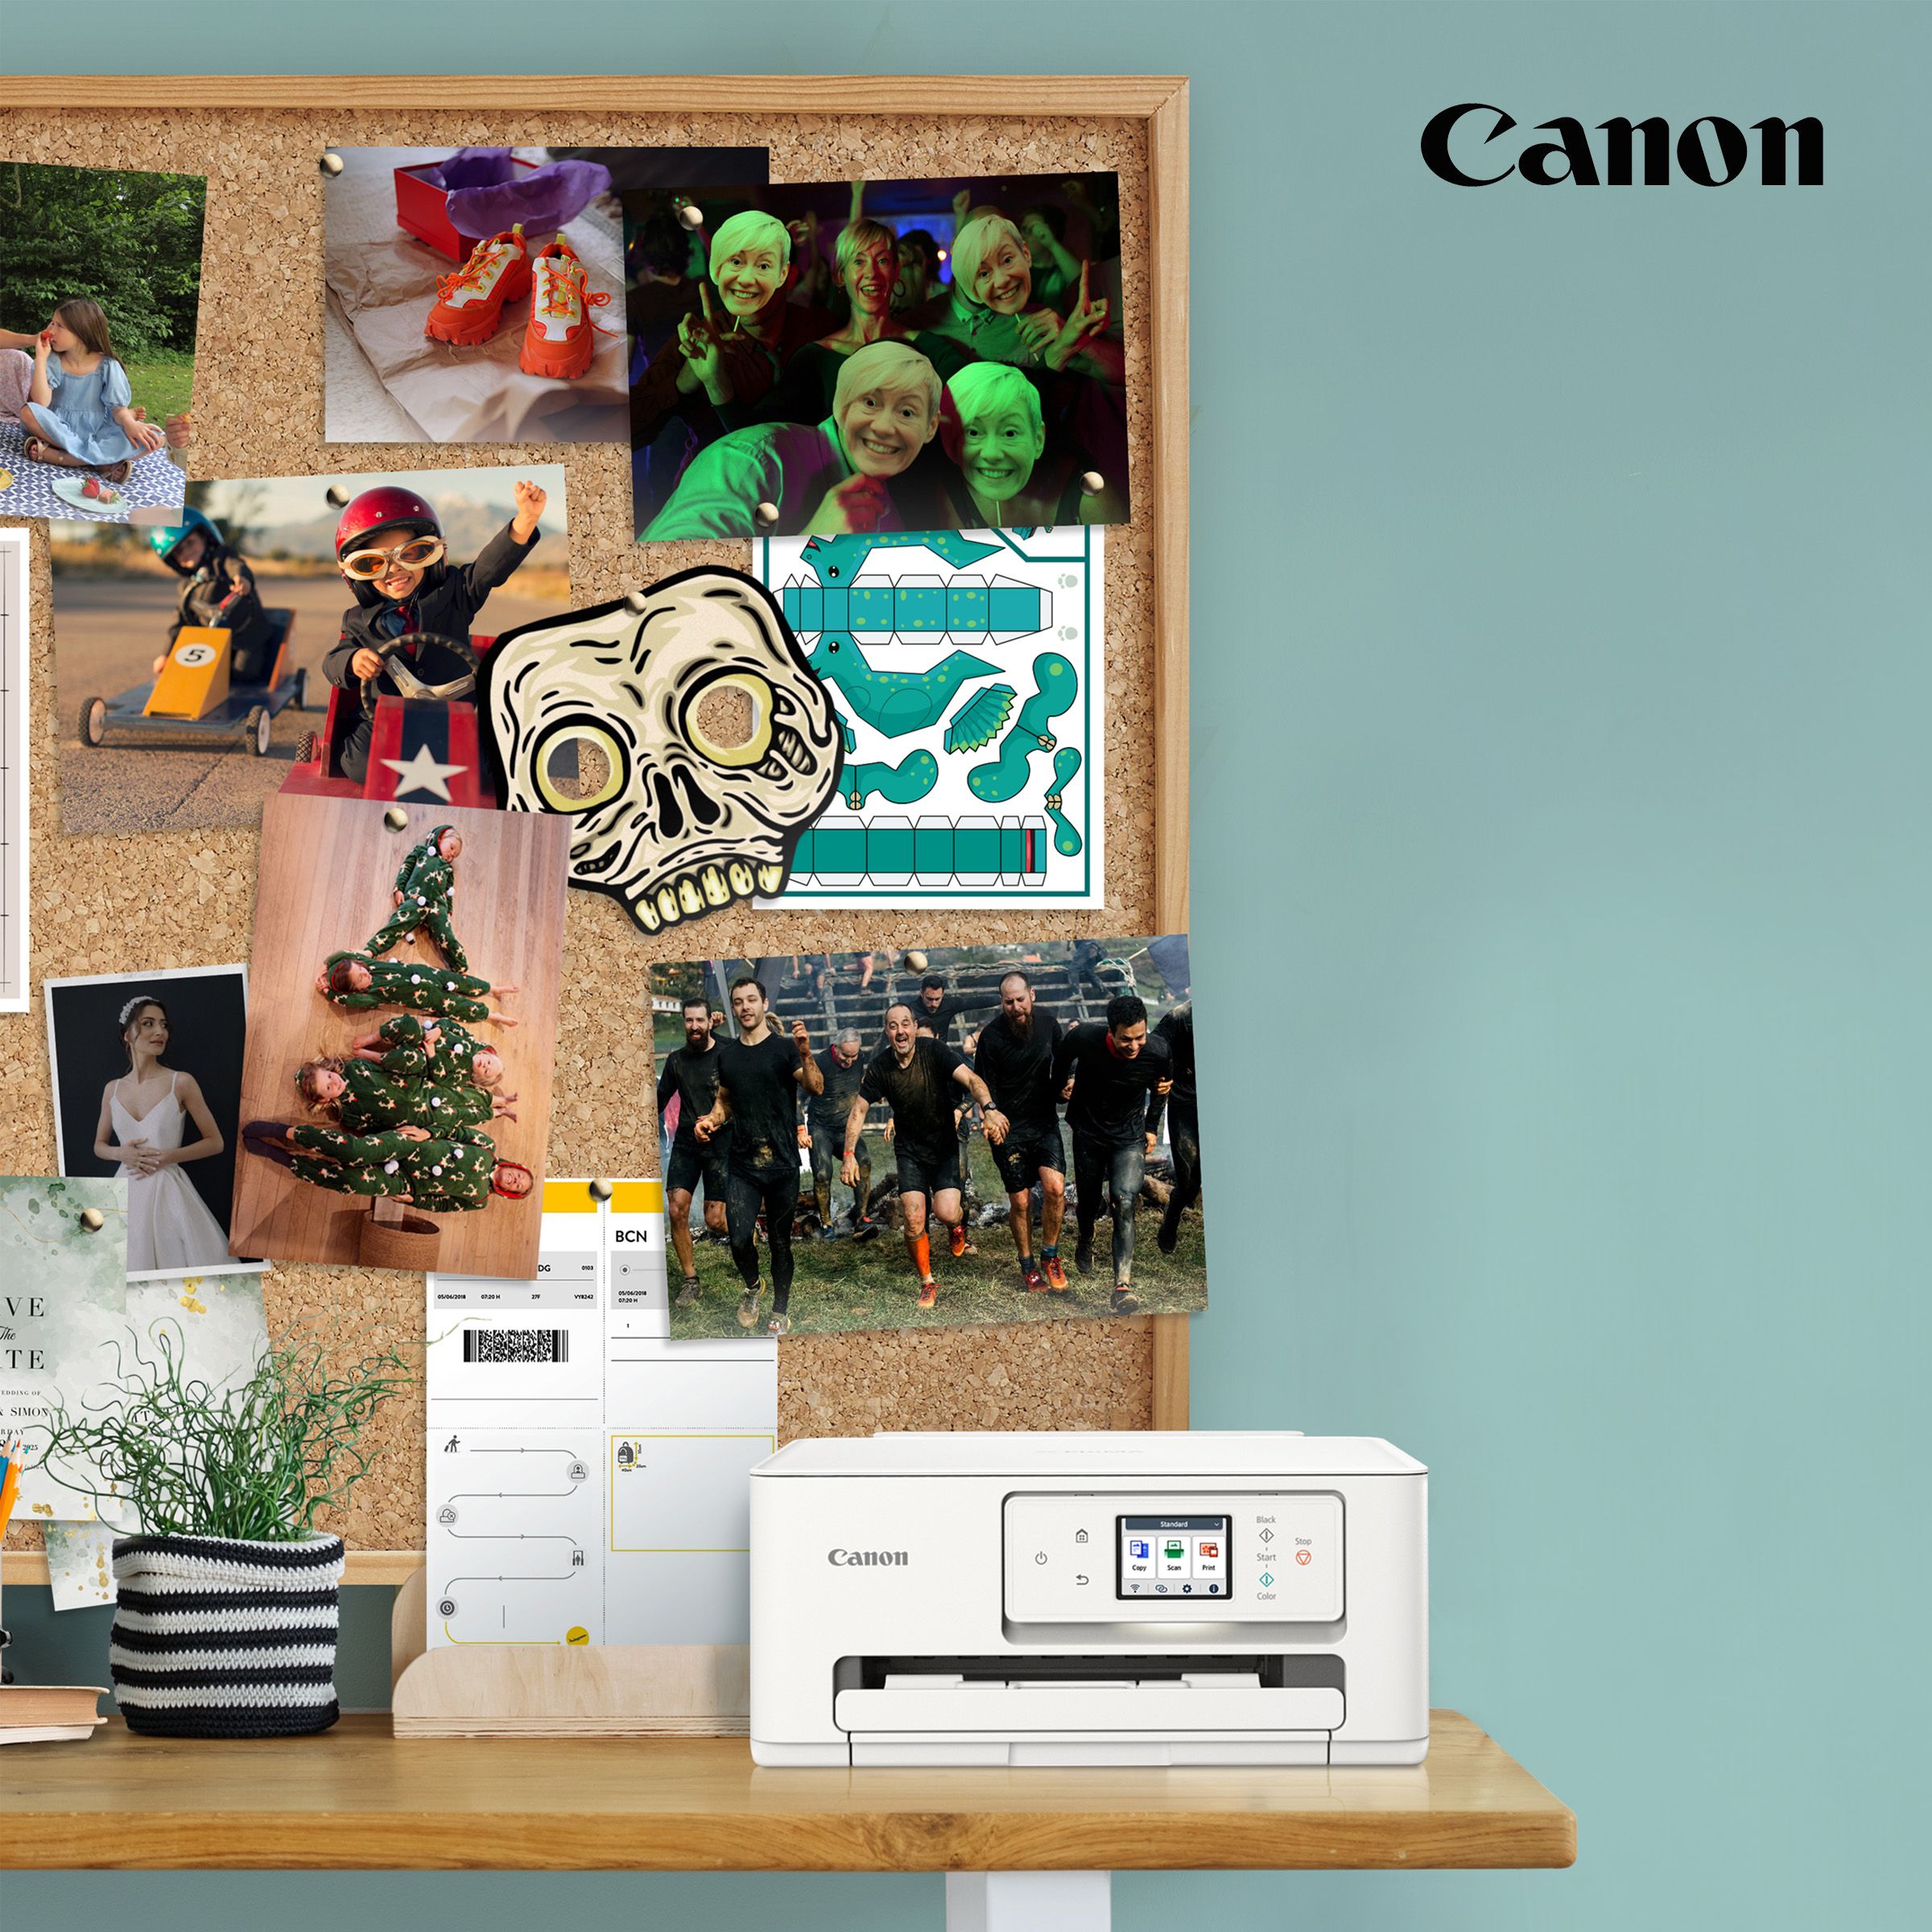 Canon printer next to a backdrop of printed images on a pin board